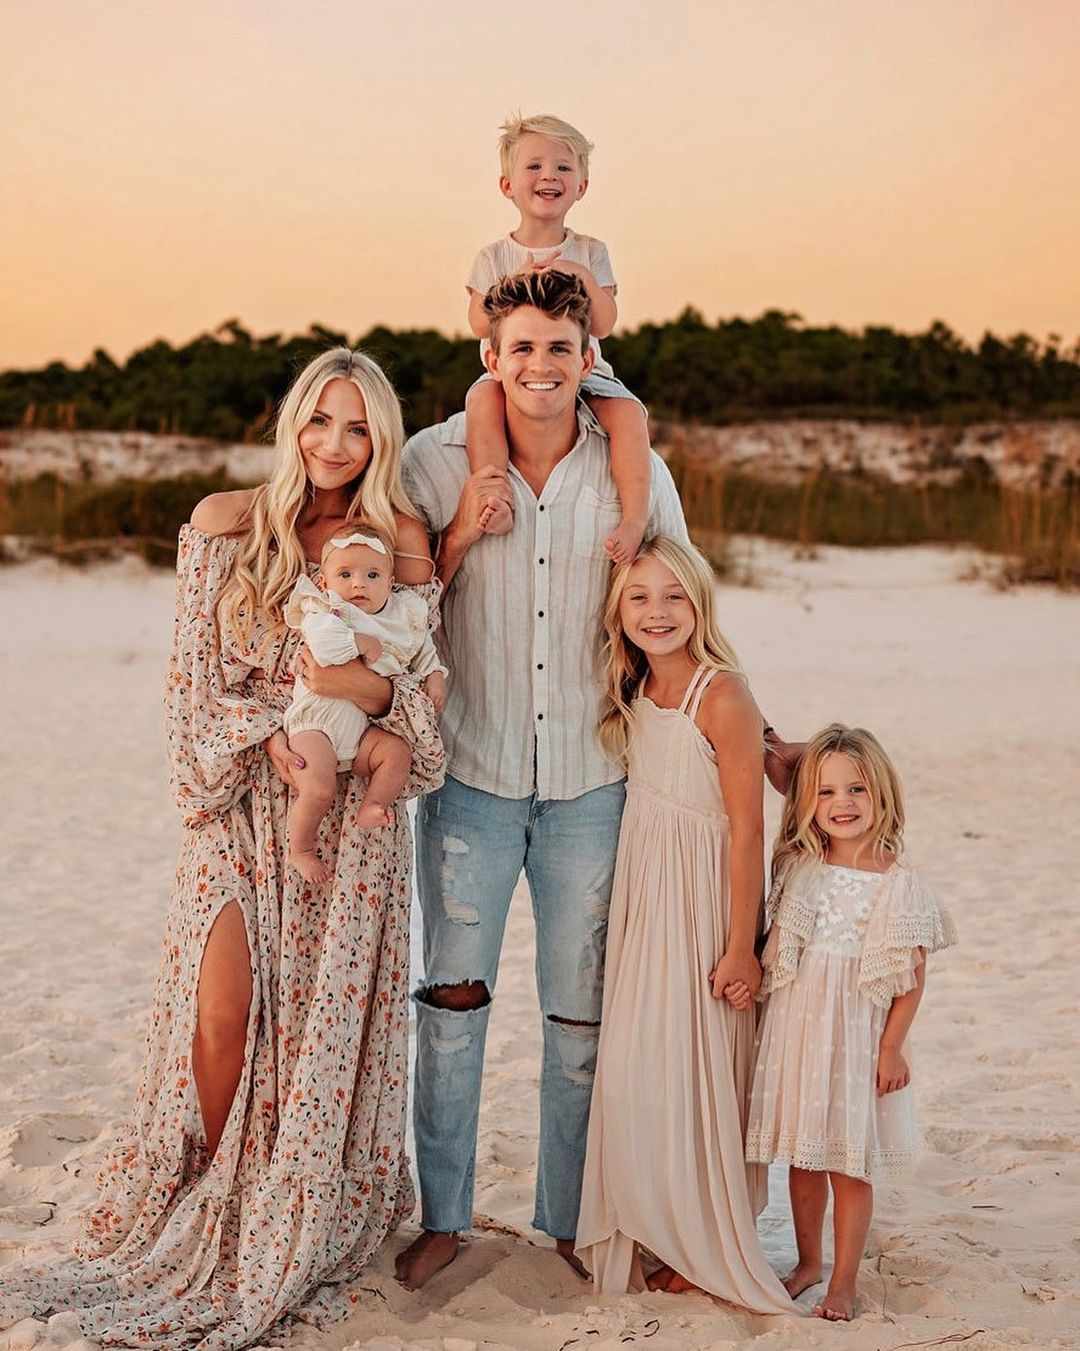 Cole LaBrant with his wife and children